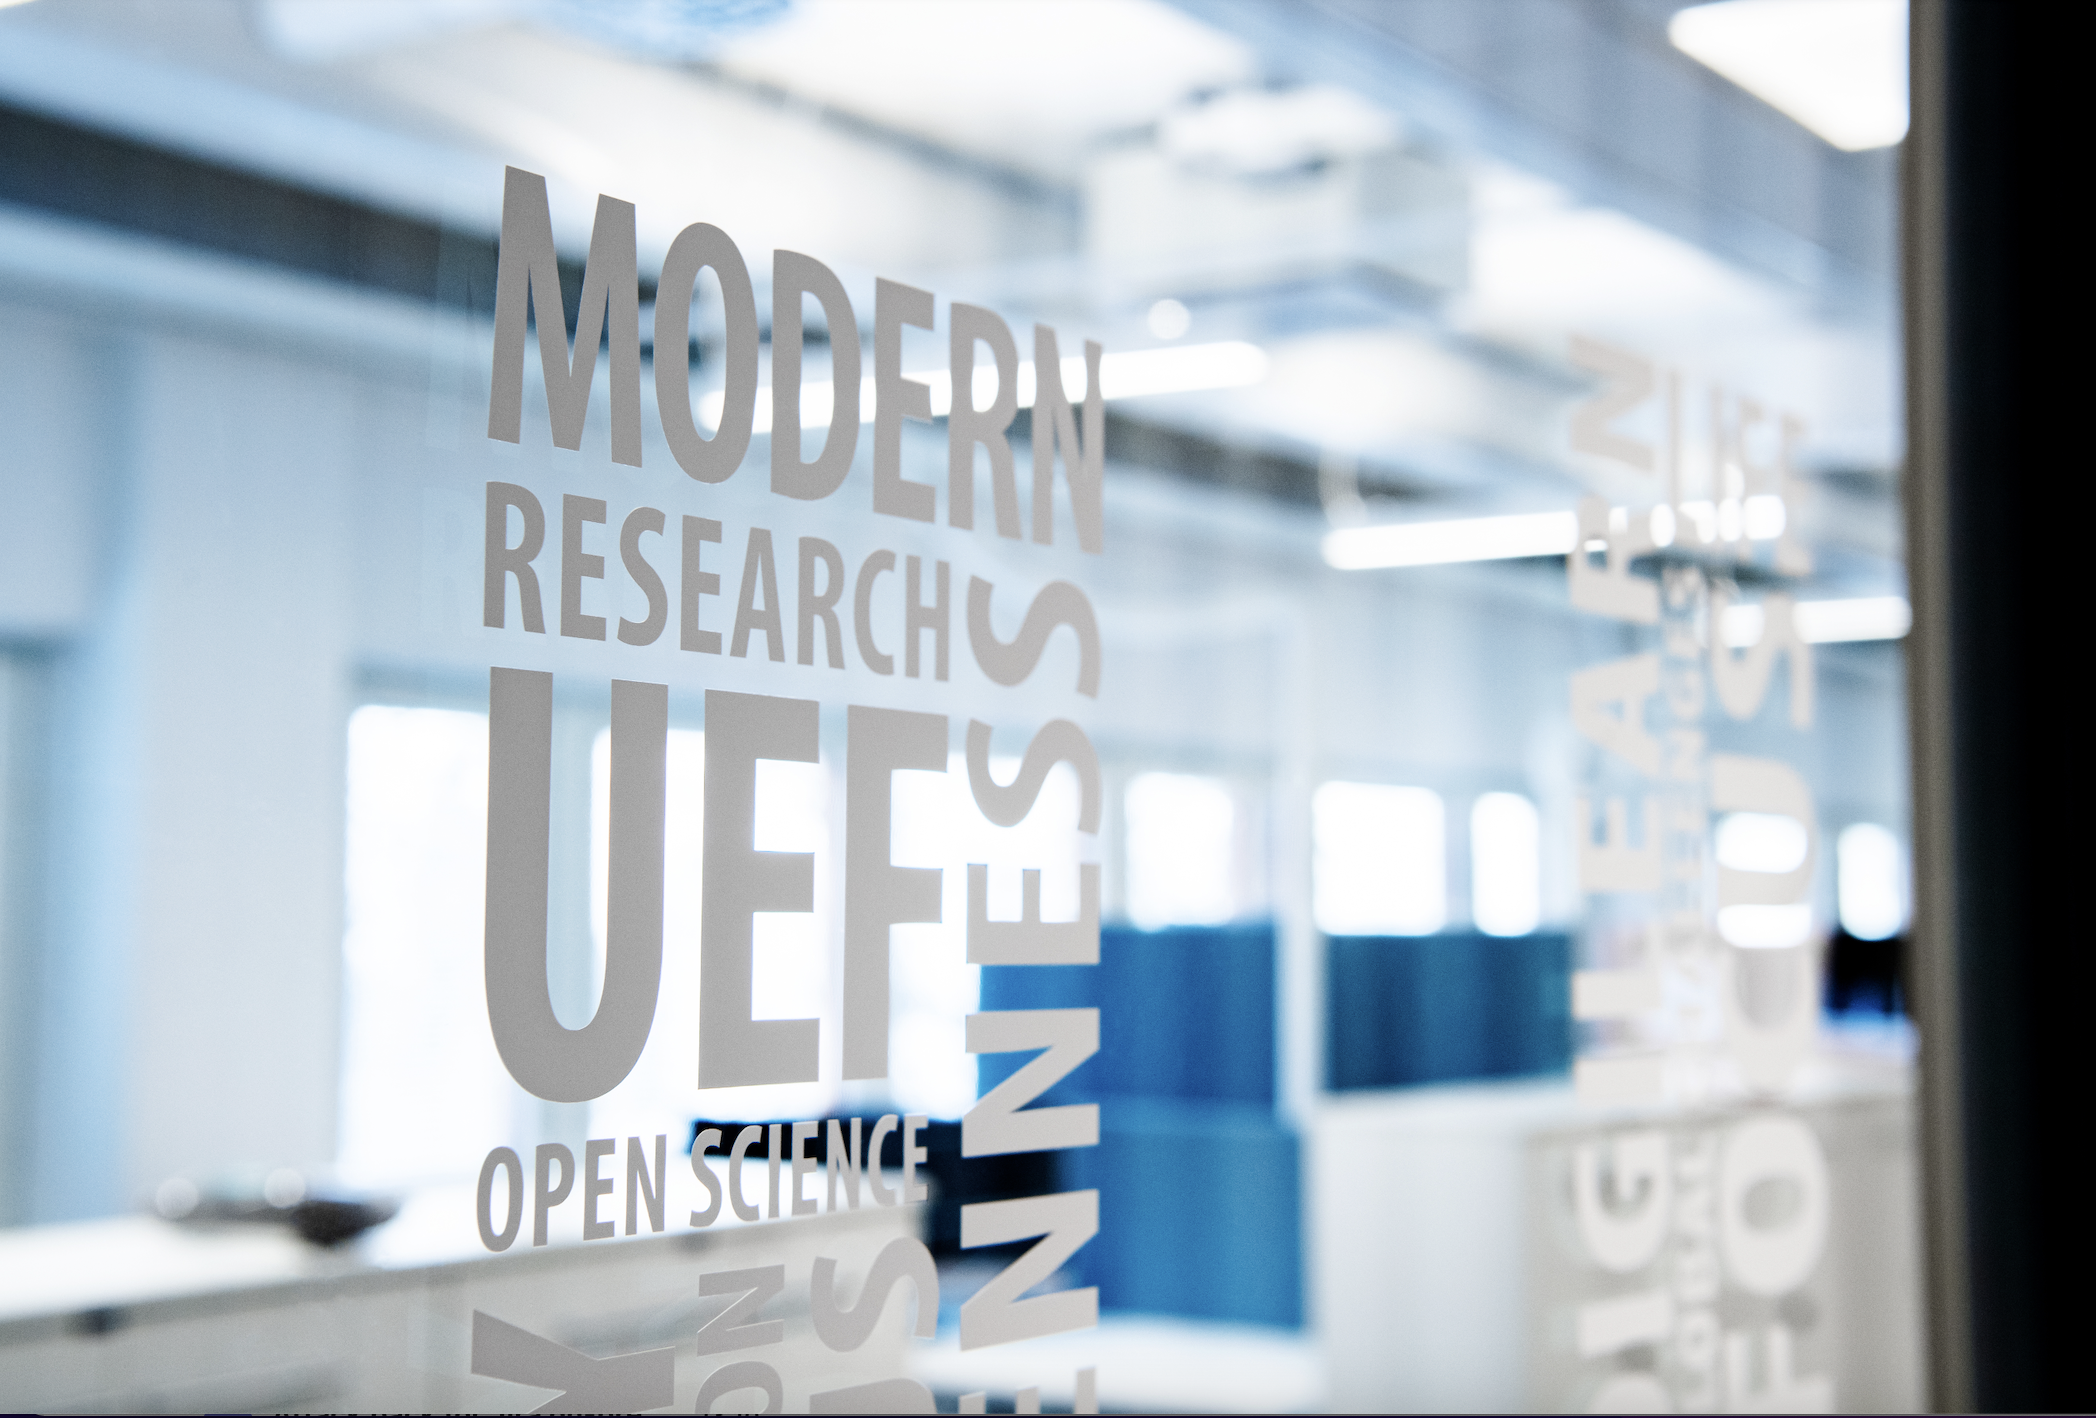 Efecte’s platform in extensive use at the University of Eastern Finland